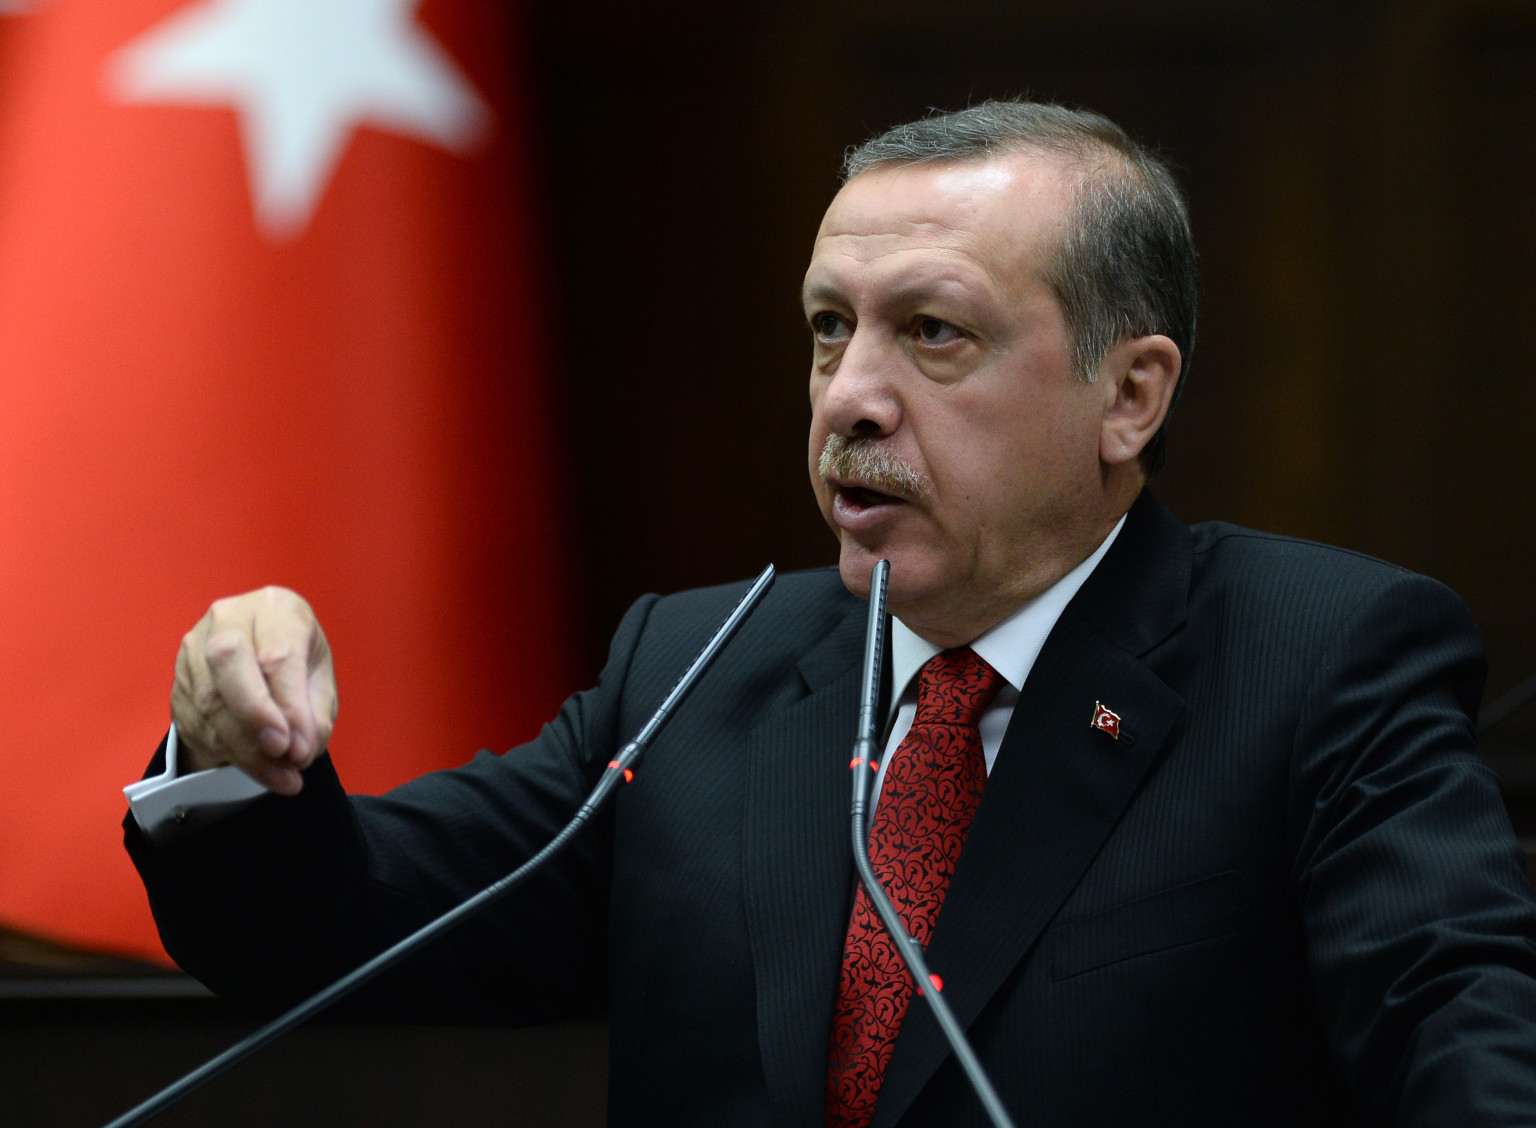 Turkey's Prime Minister Recep Tayyip Erdogan addresses his lawmakers at parliament, in Ankara, Turkey, Tuesday, June 18, 2013. Turkish Prime Minister Recep Tayyip Erdogan says he will increase police powers following a wave of anti-government protests. T